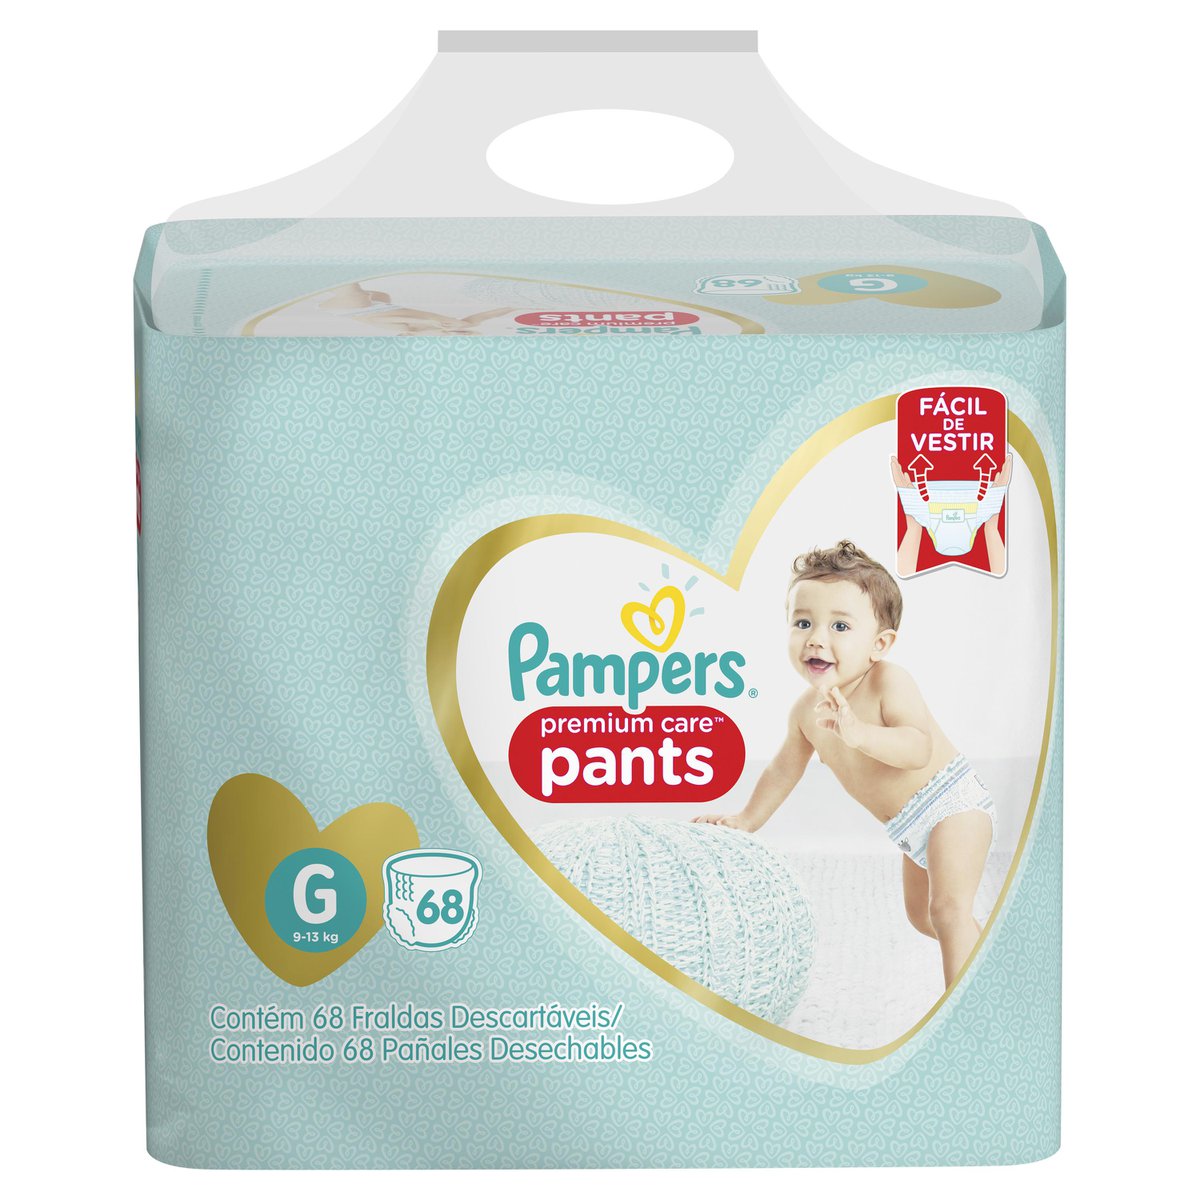 Pampers Premium Care Pants 32 Pack Diapers,IDN Import MADE IN JAPAN SZ  Small New | eBay